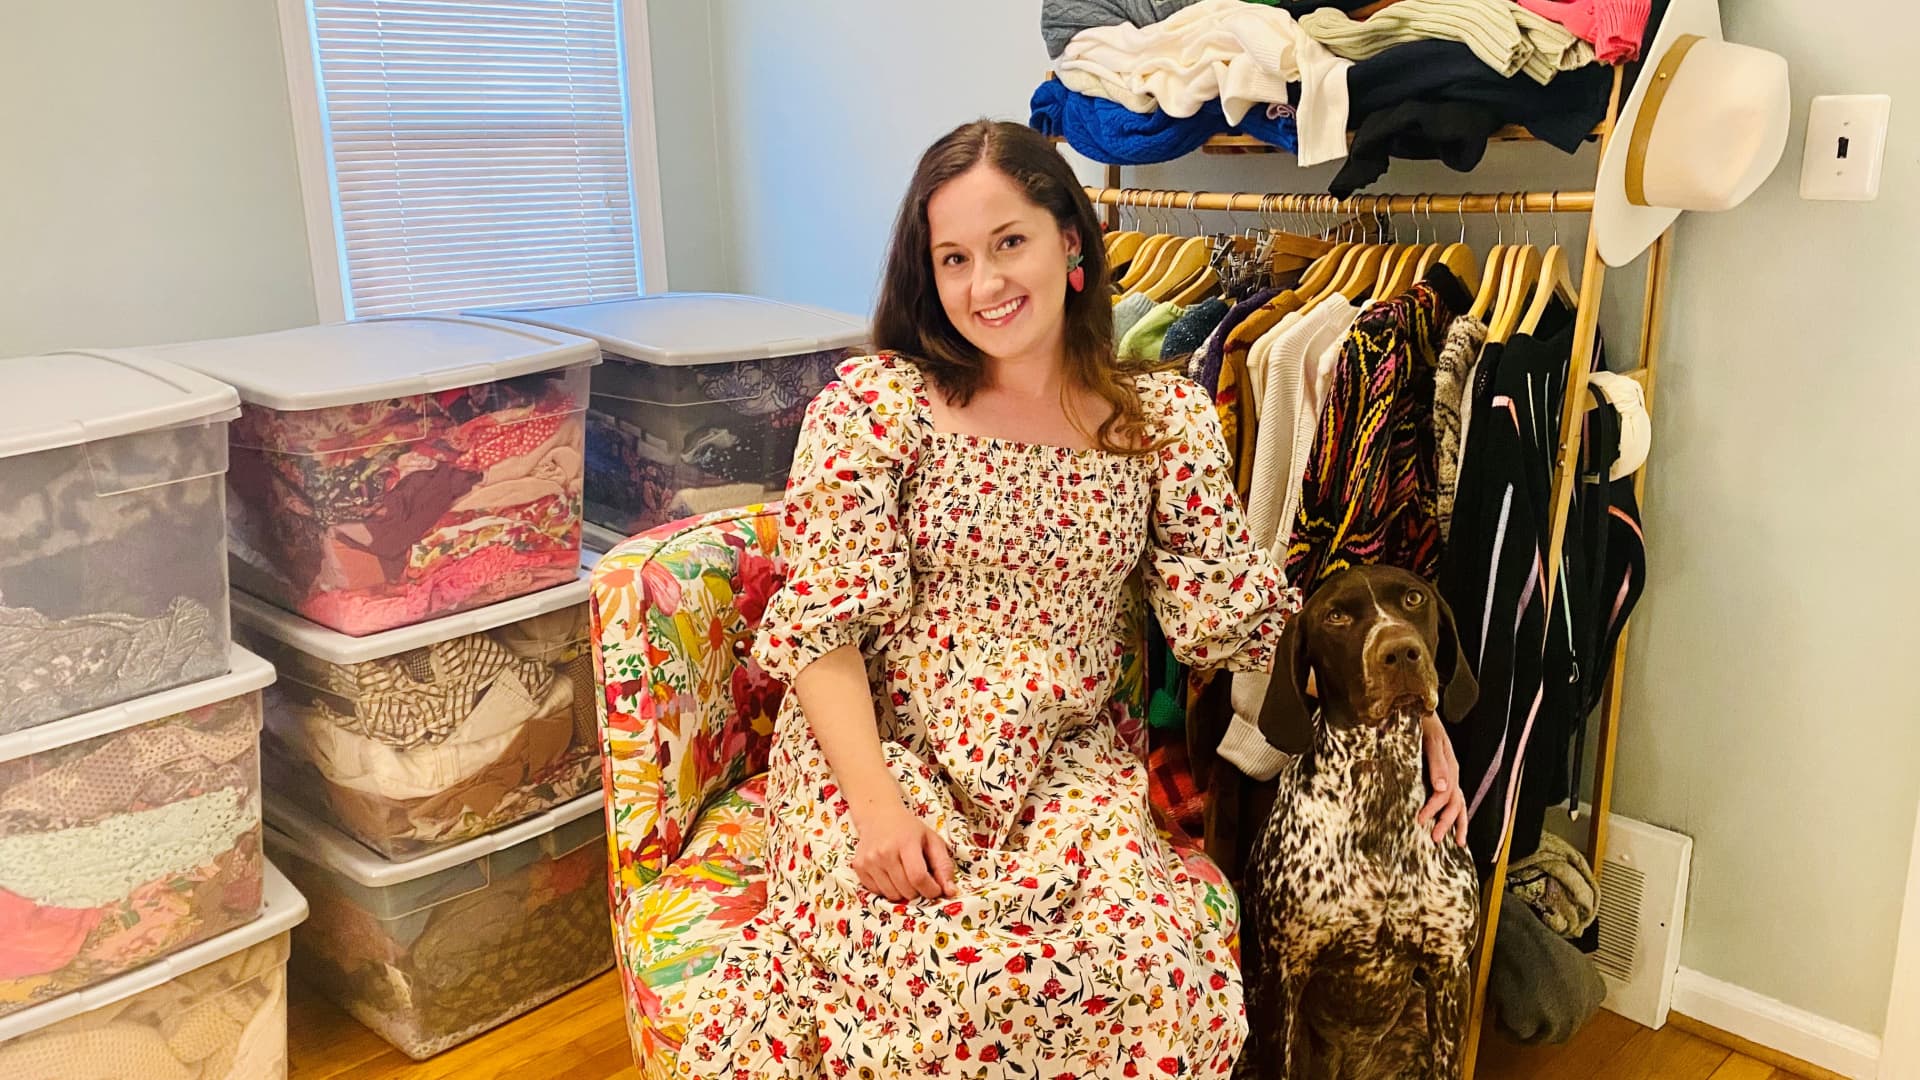 This 26-year-old med student bought a house by selling used clothes: Without the side hustle, 'I wouldn't even have a savings account' - CNB...